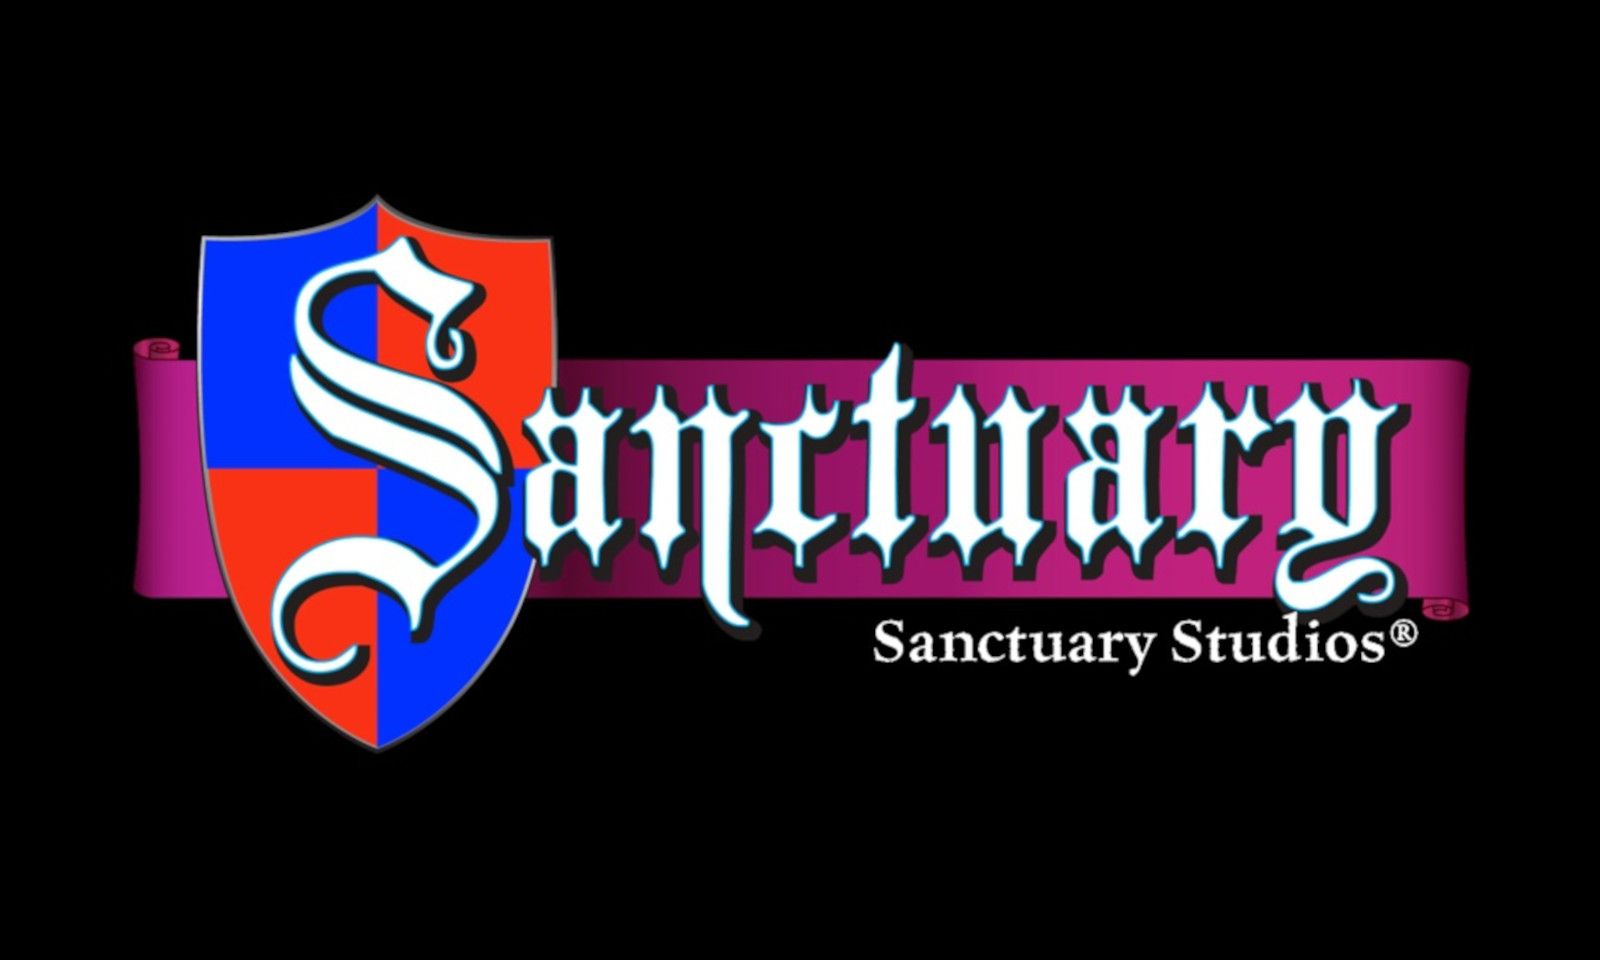 Sanctuary Studios to Host Party Celebrating Reopening May 13